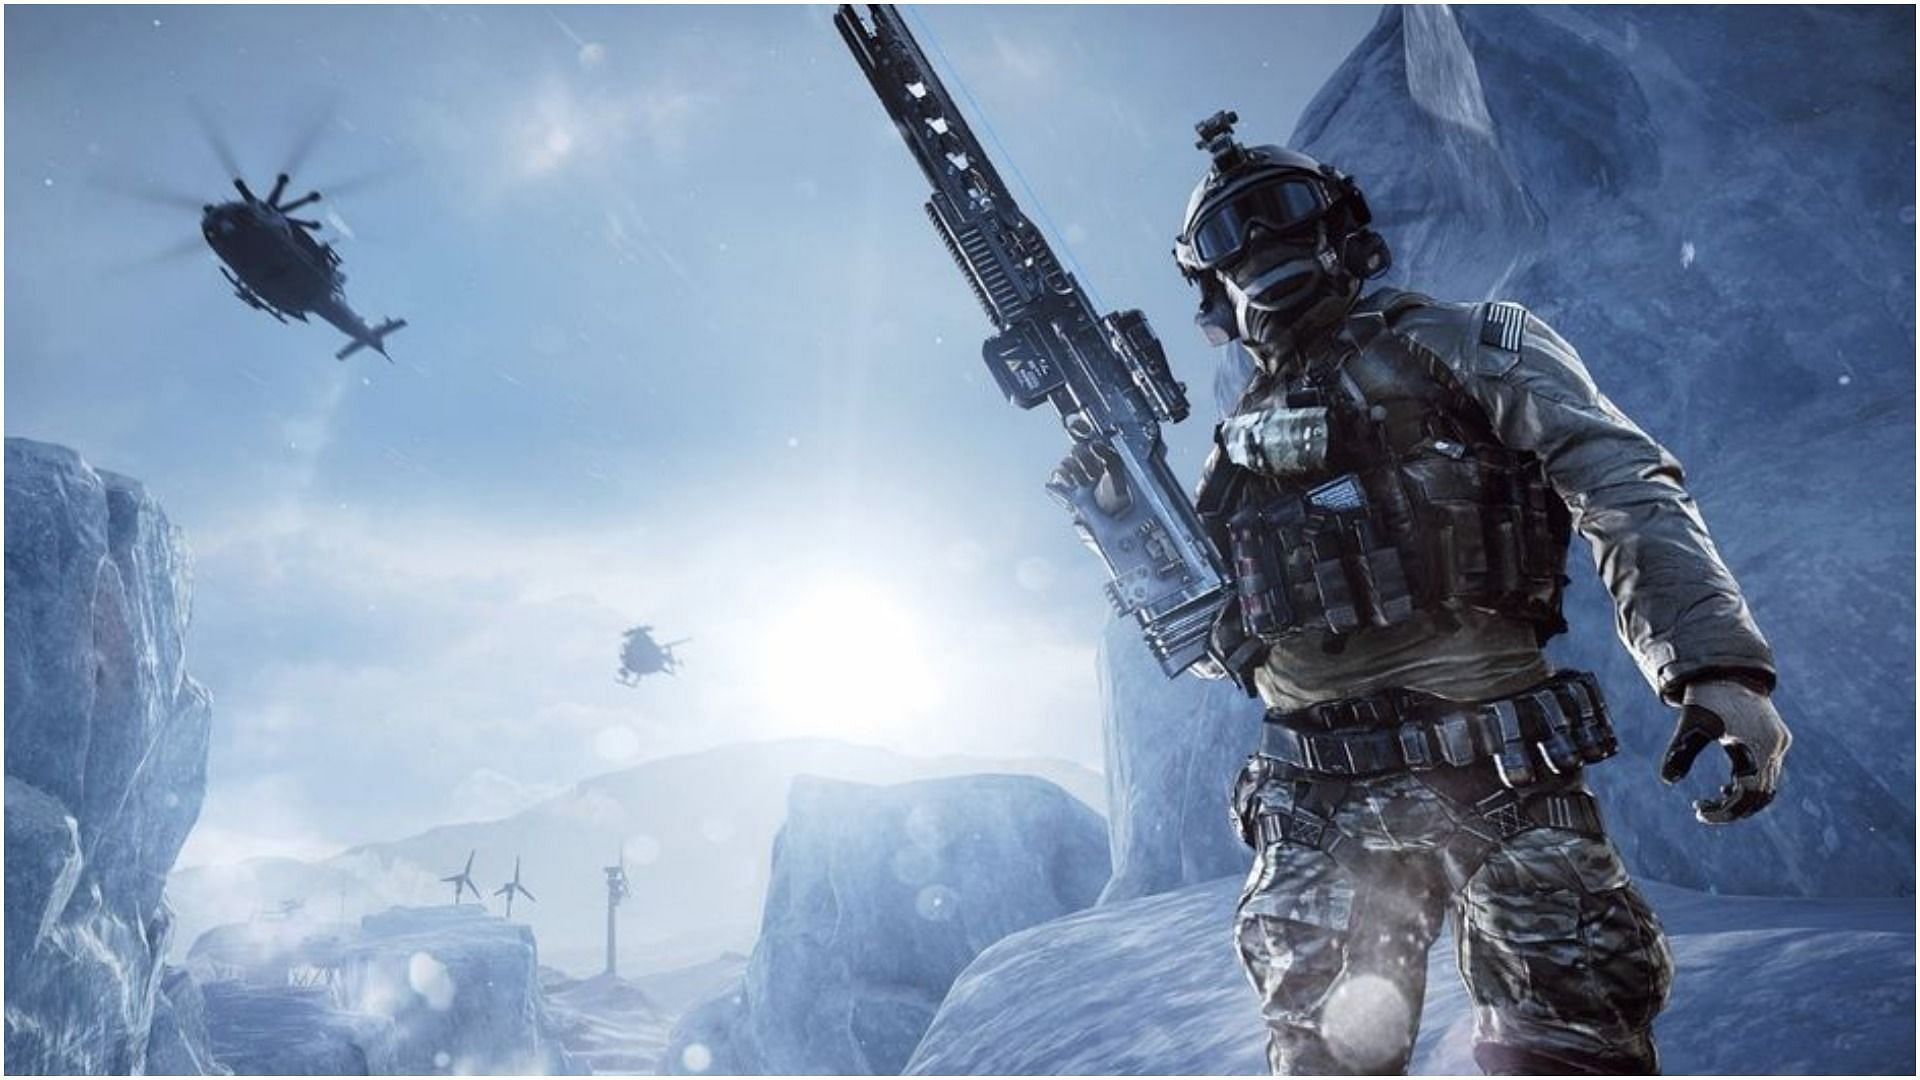 Battlefield 2042 is displaying dangerous flashes that could trigger epilepsy (Image via DICE)